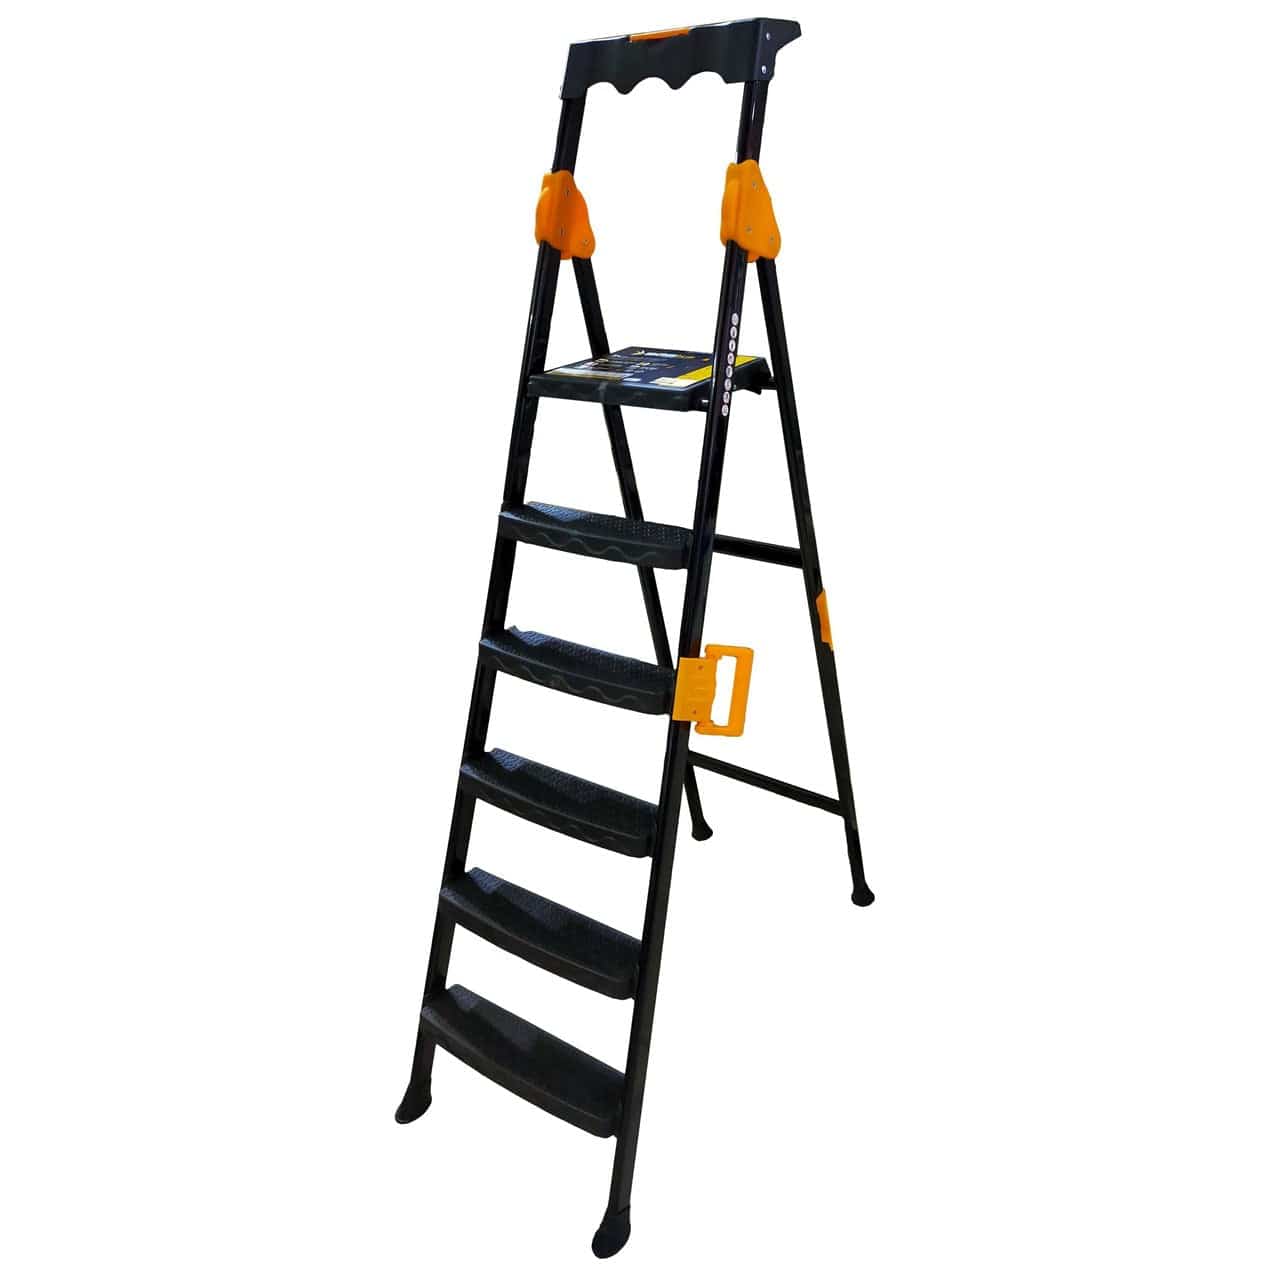 SGS Prostep Metal Step Ladder | Supply Master | Accra, Ghana Ladder Buy Tools hardware Building materials